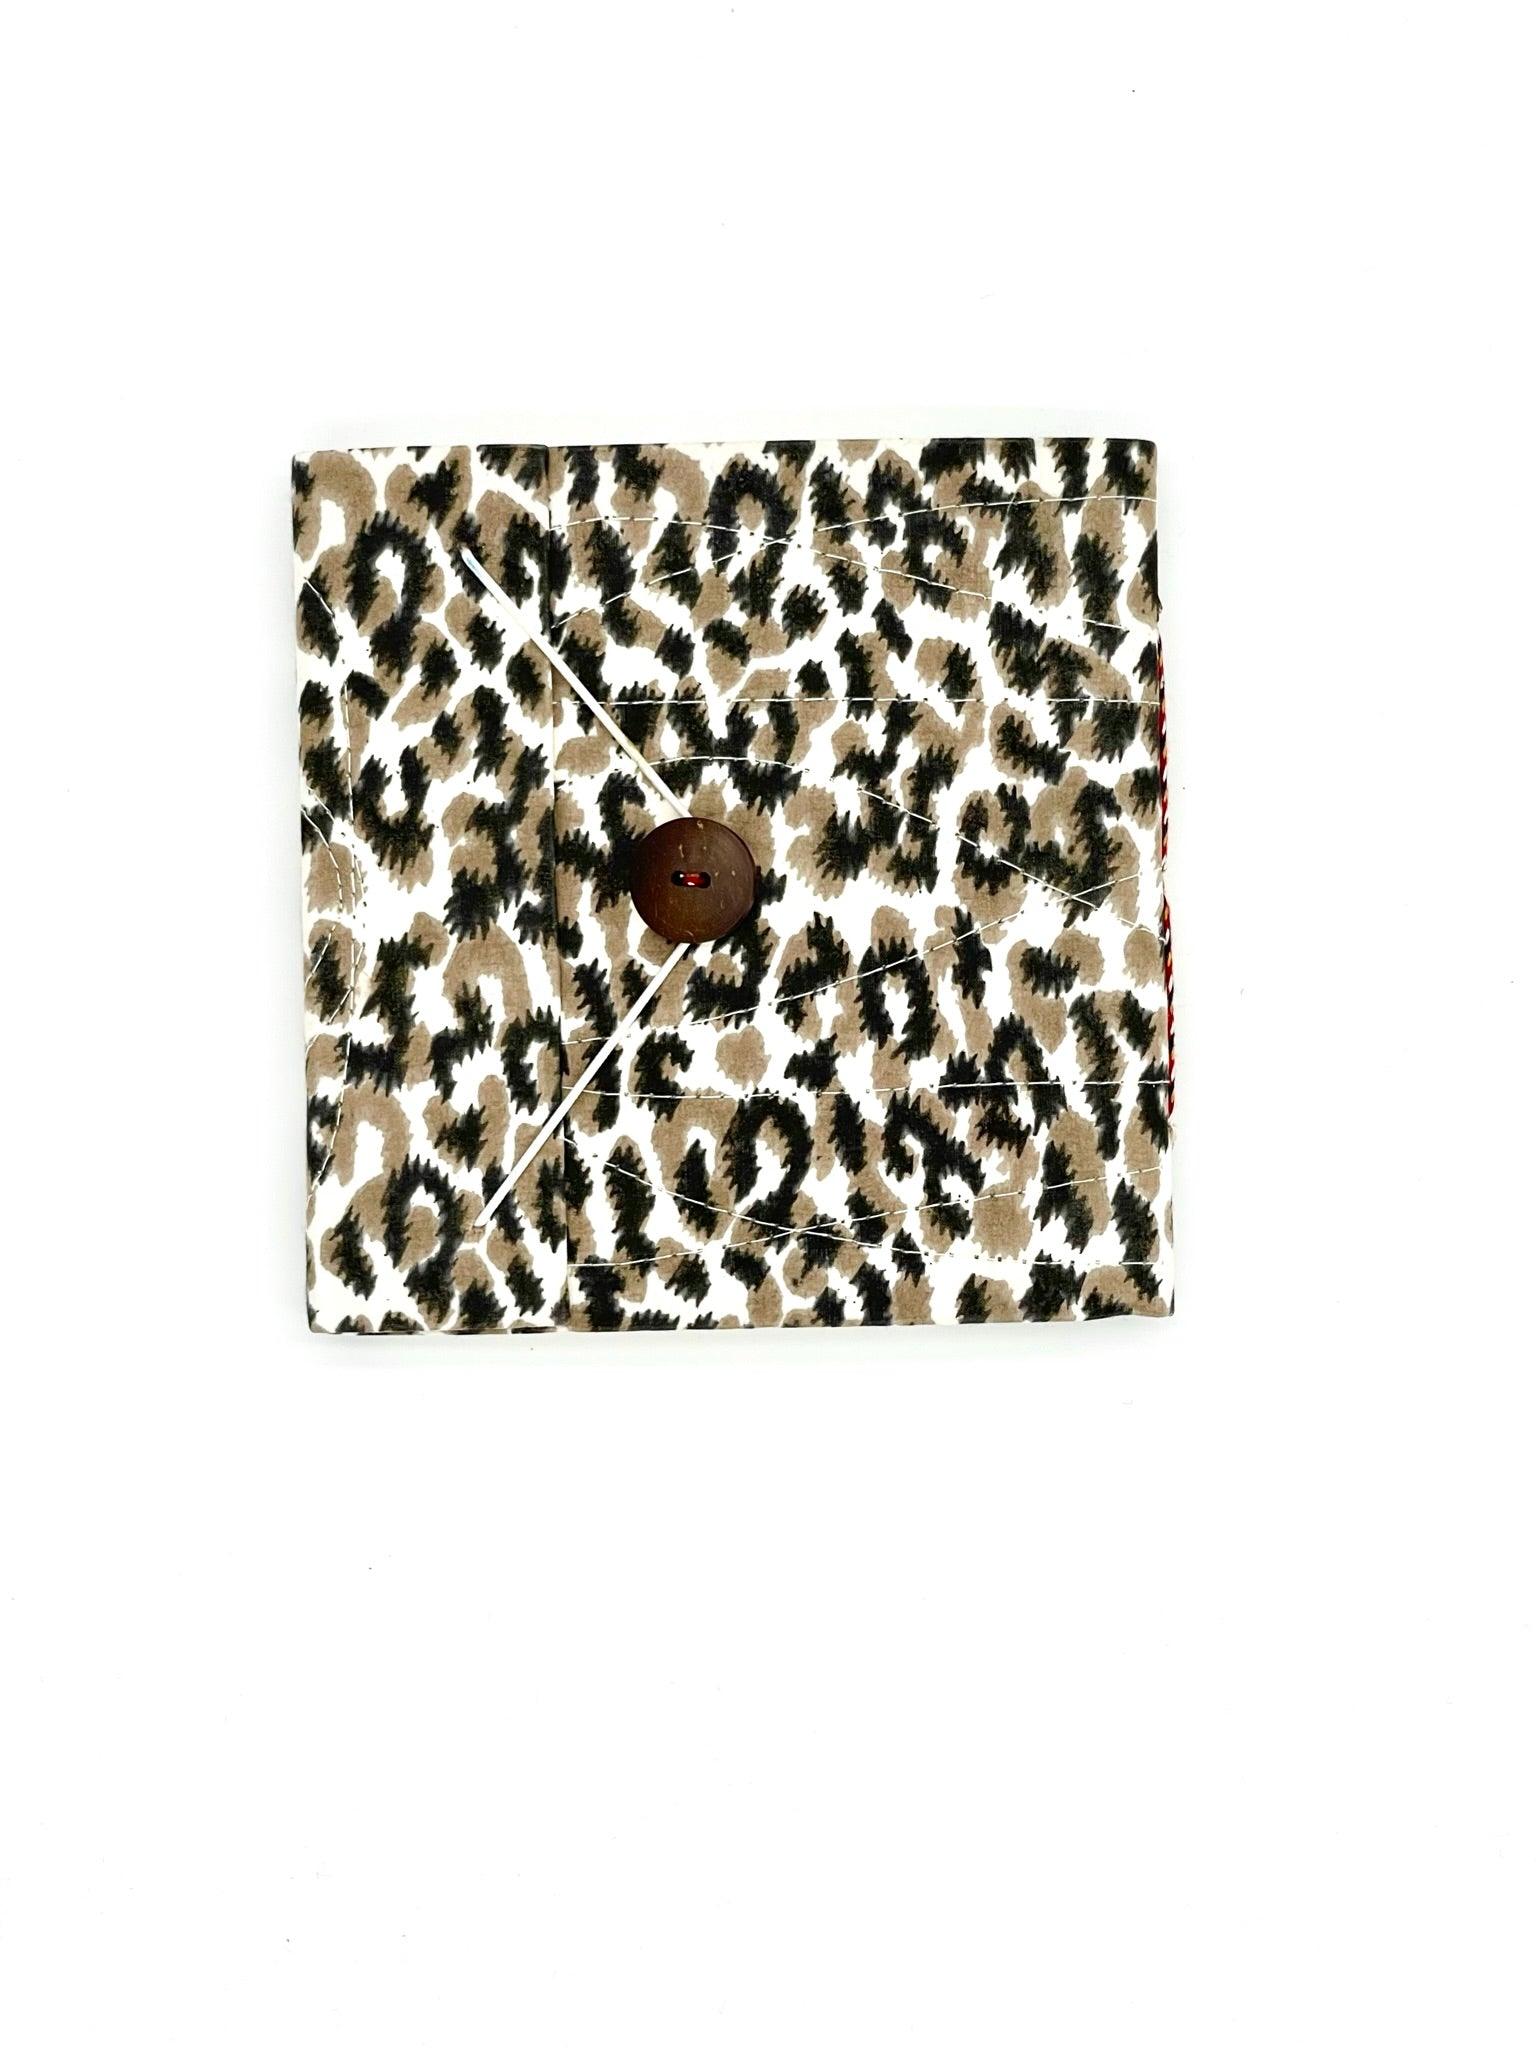 Block Print Journal/Notebook, Leopard - Unlined, 100 Pages, Thick Paper, Hard Cover - Transcend